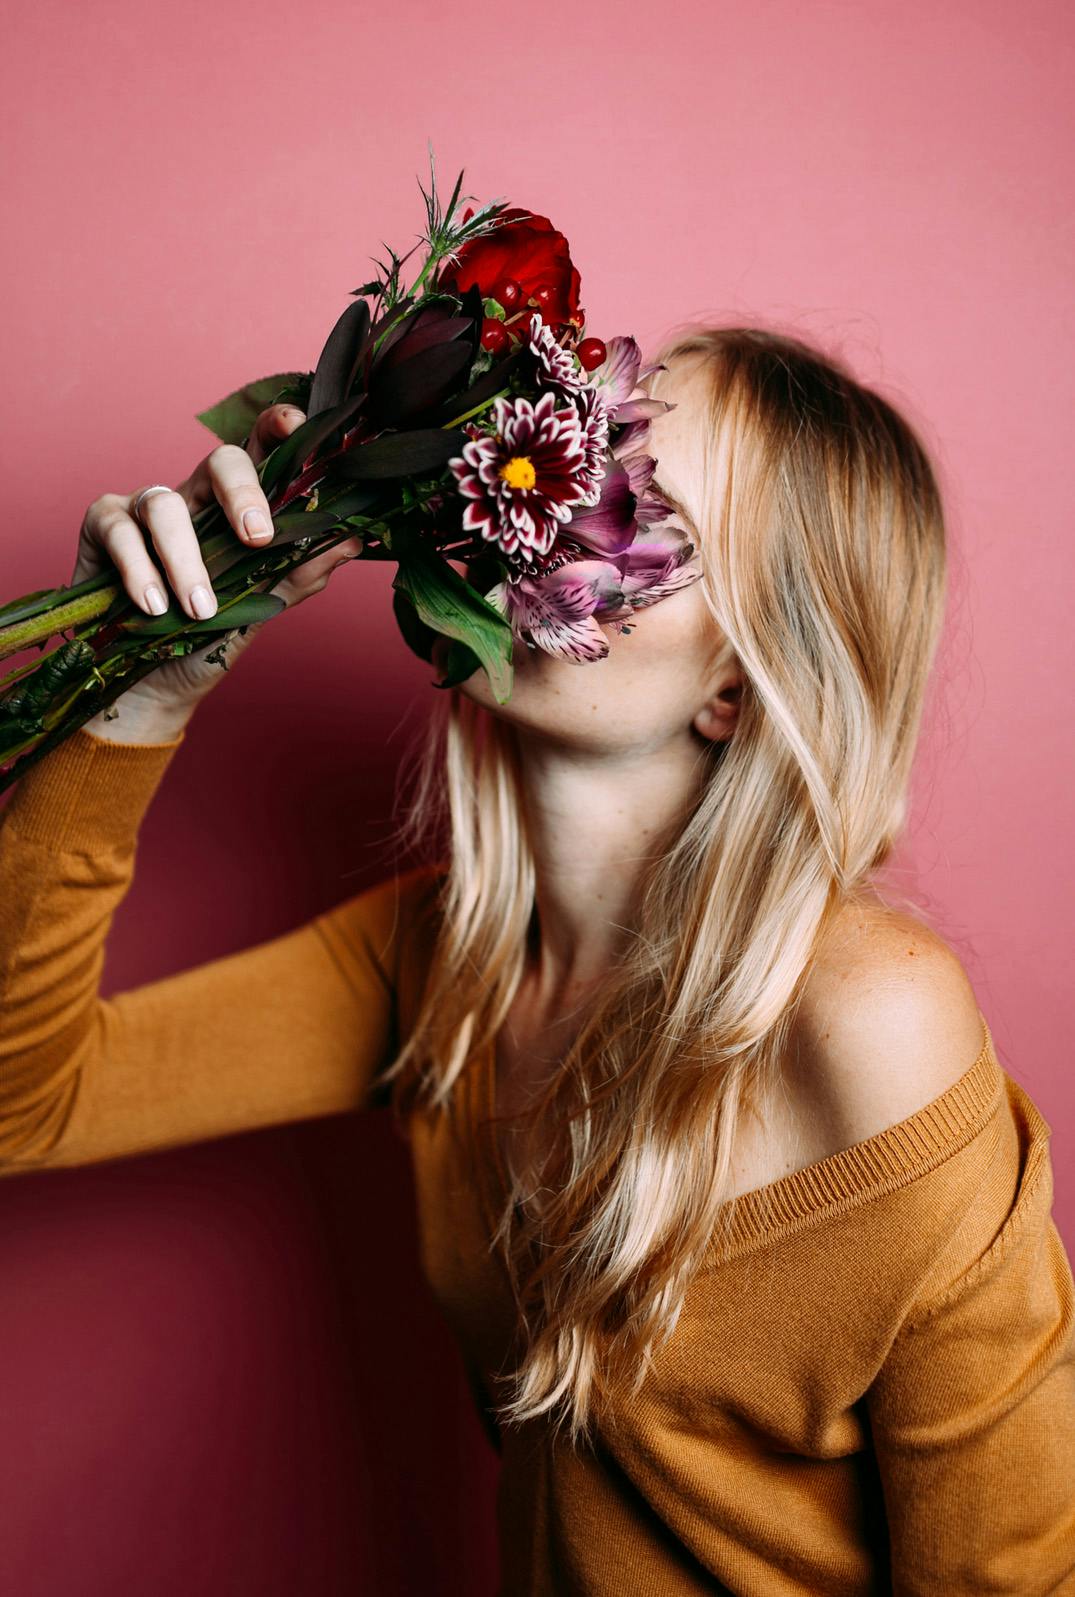 A woman with blonde burying her face into a bouquet flowers, standing against a red wall